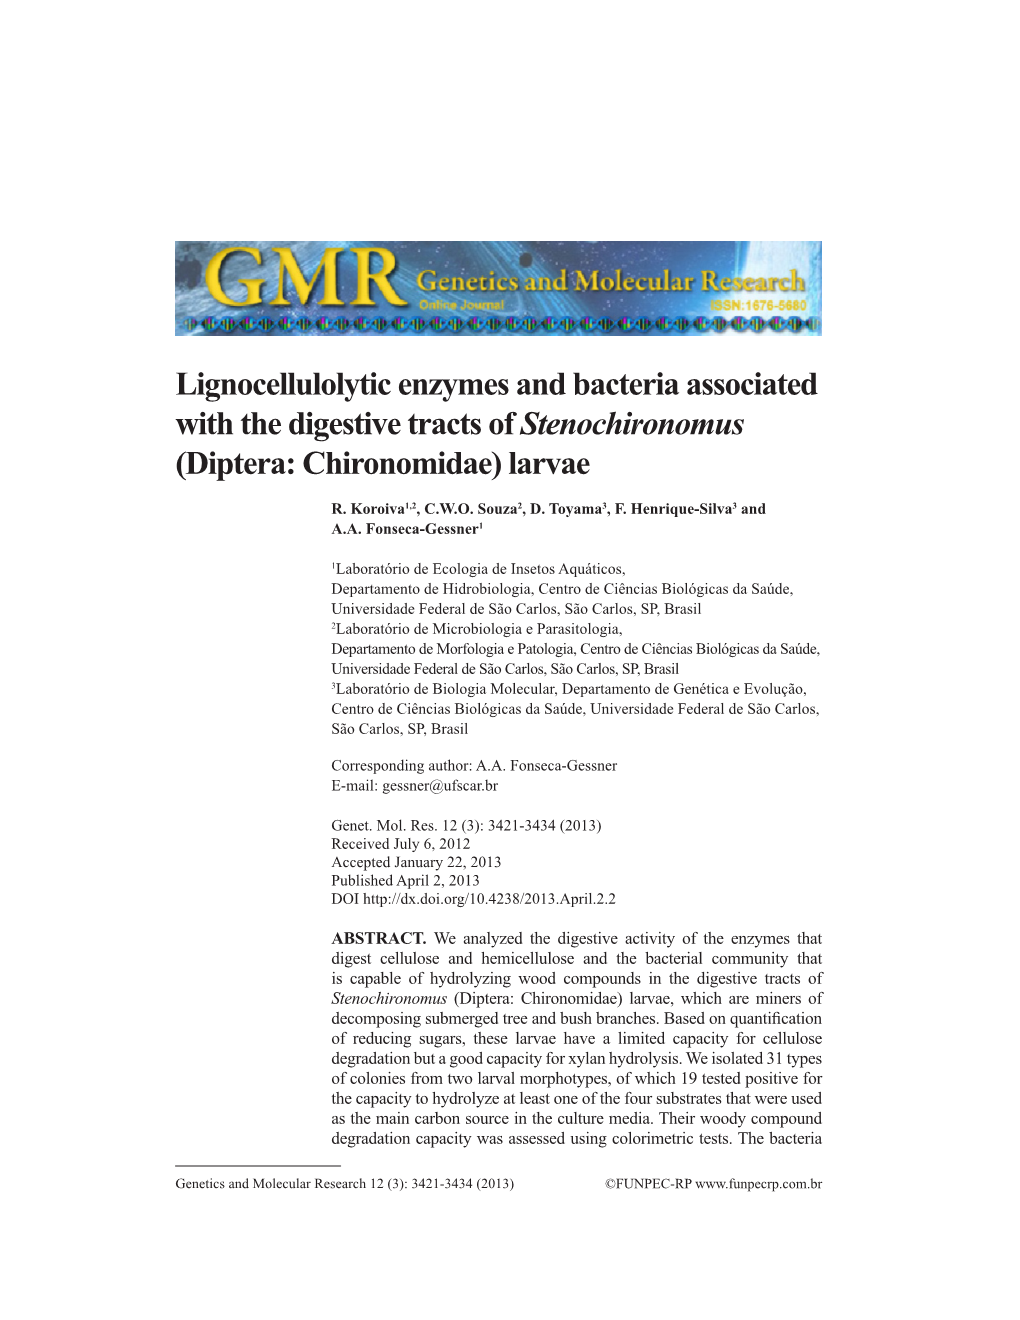 Lignocellulolytic Enzymes and Bacteria Associated with the Digestive Tracts of Stenochironomus (Diptera: Chironomidae) Larvae